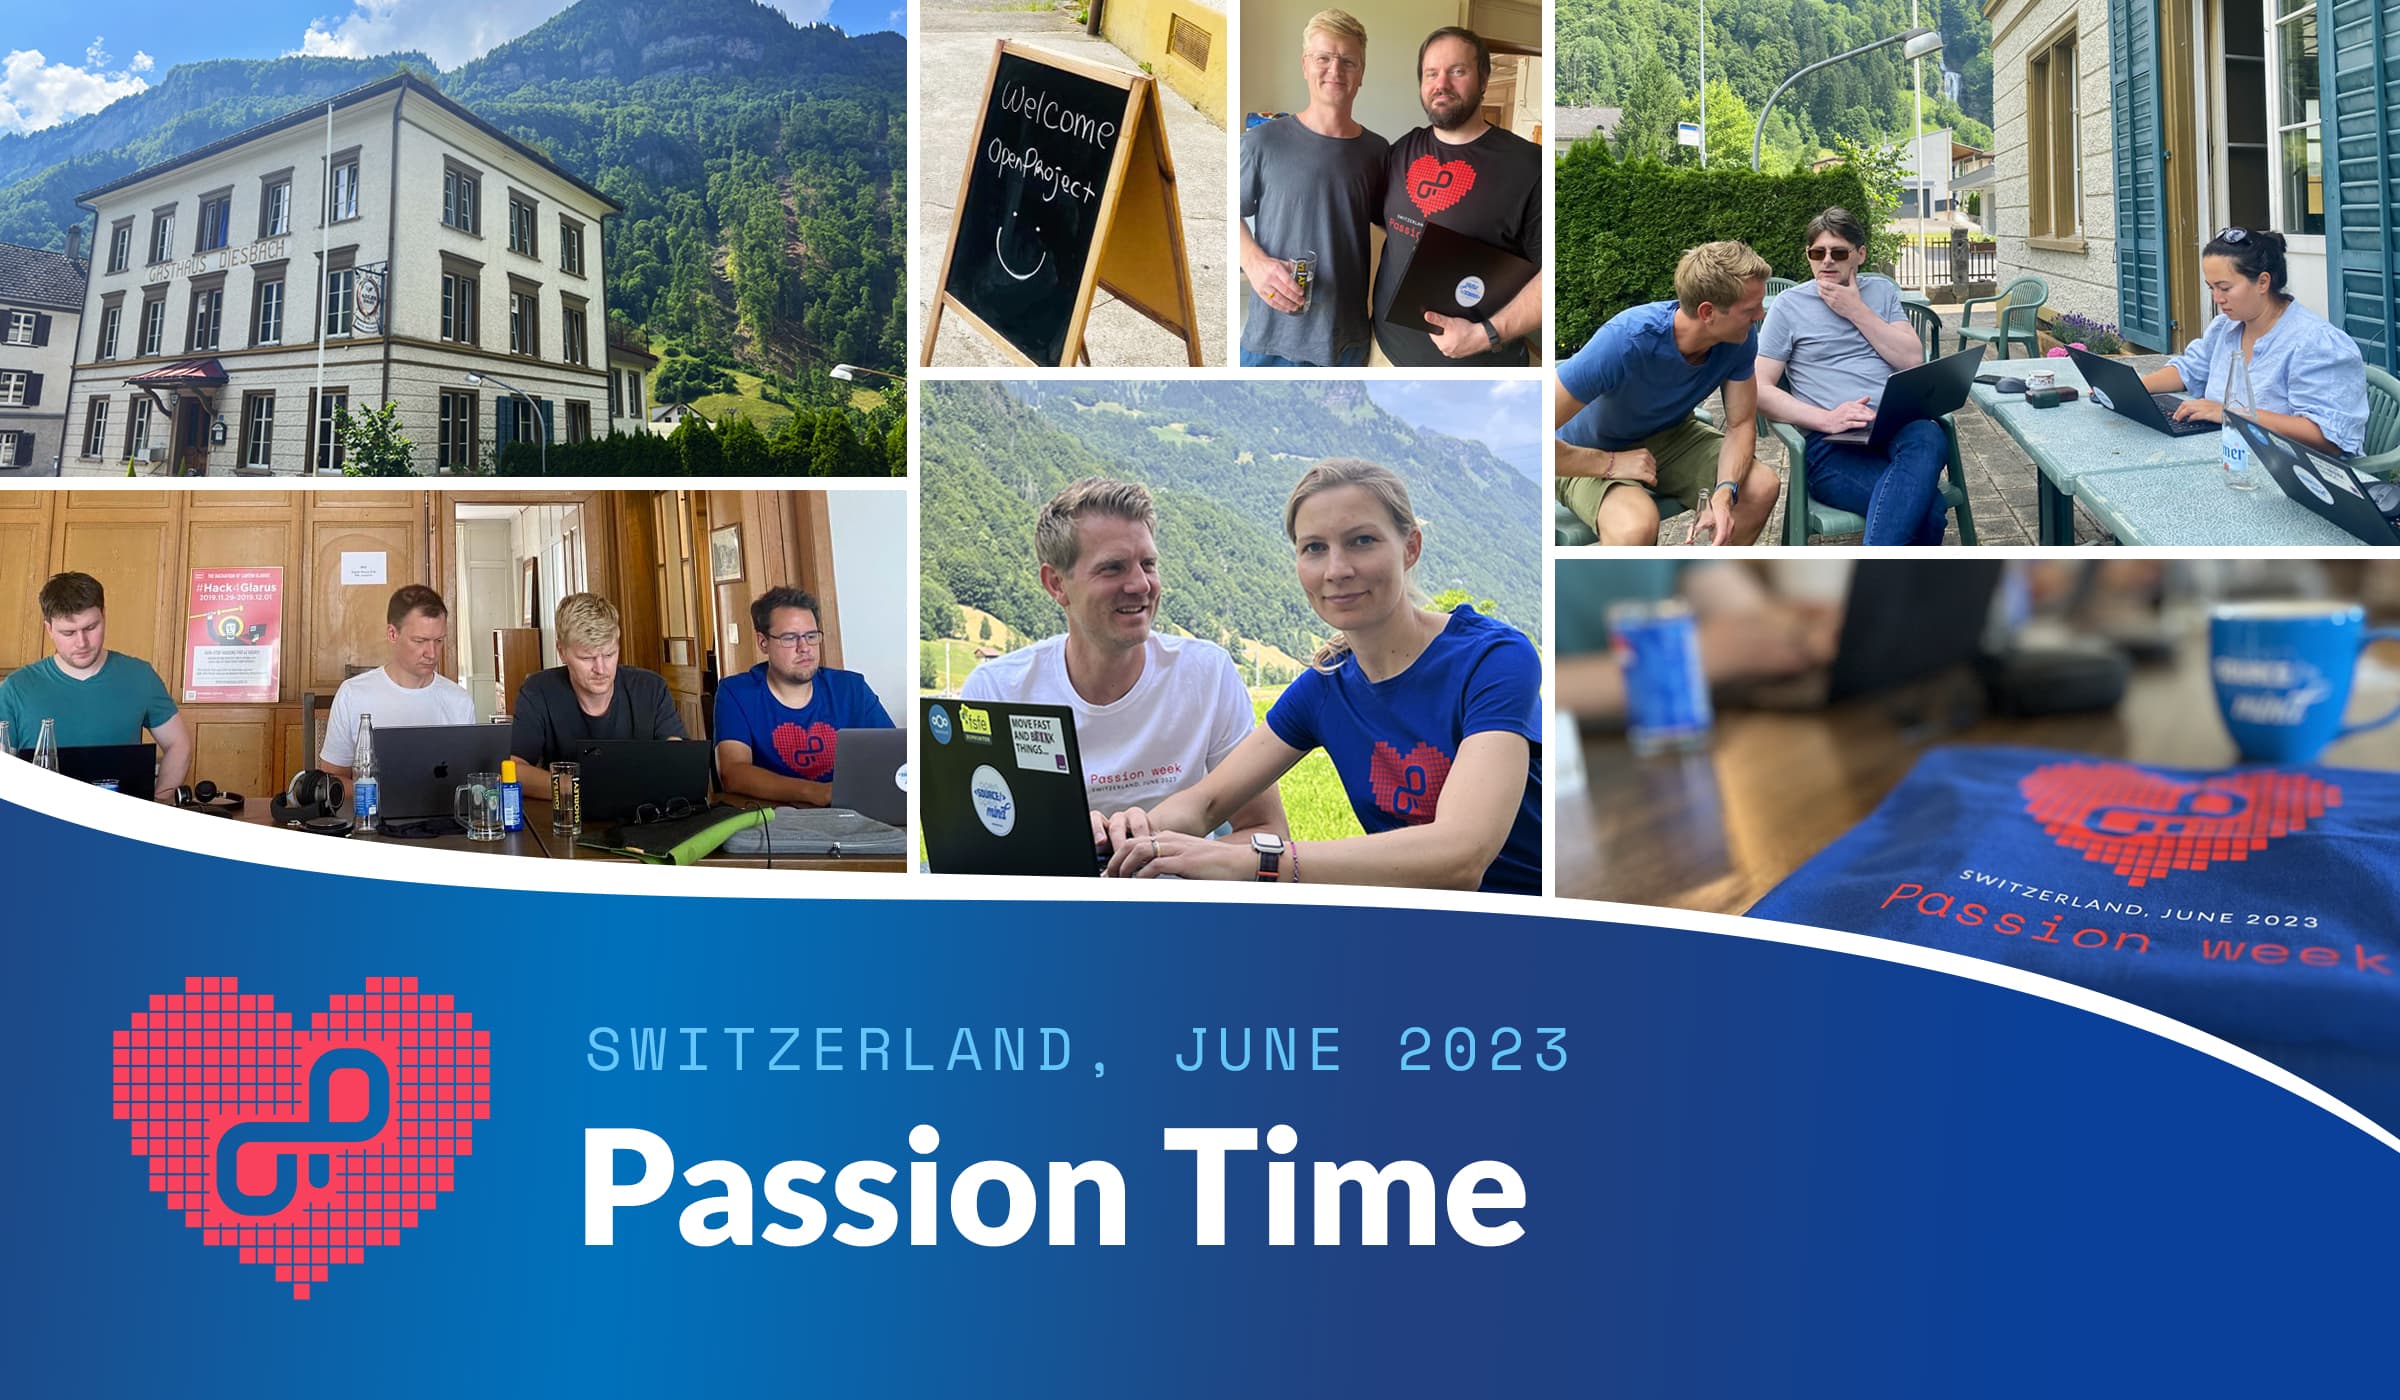 OpenProject Passion Time in Switzerland, 2023